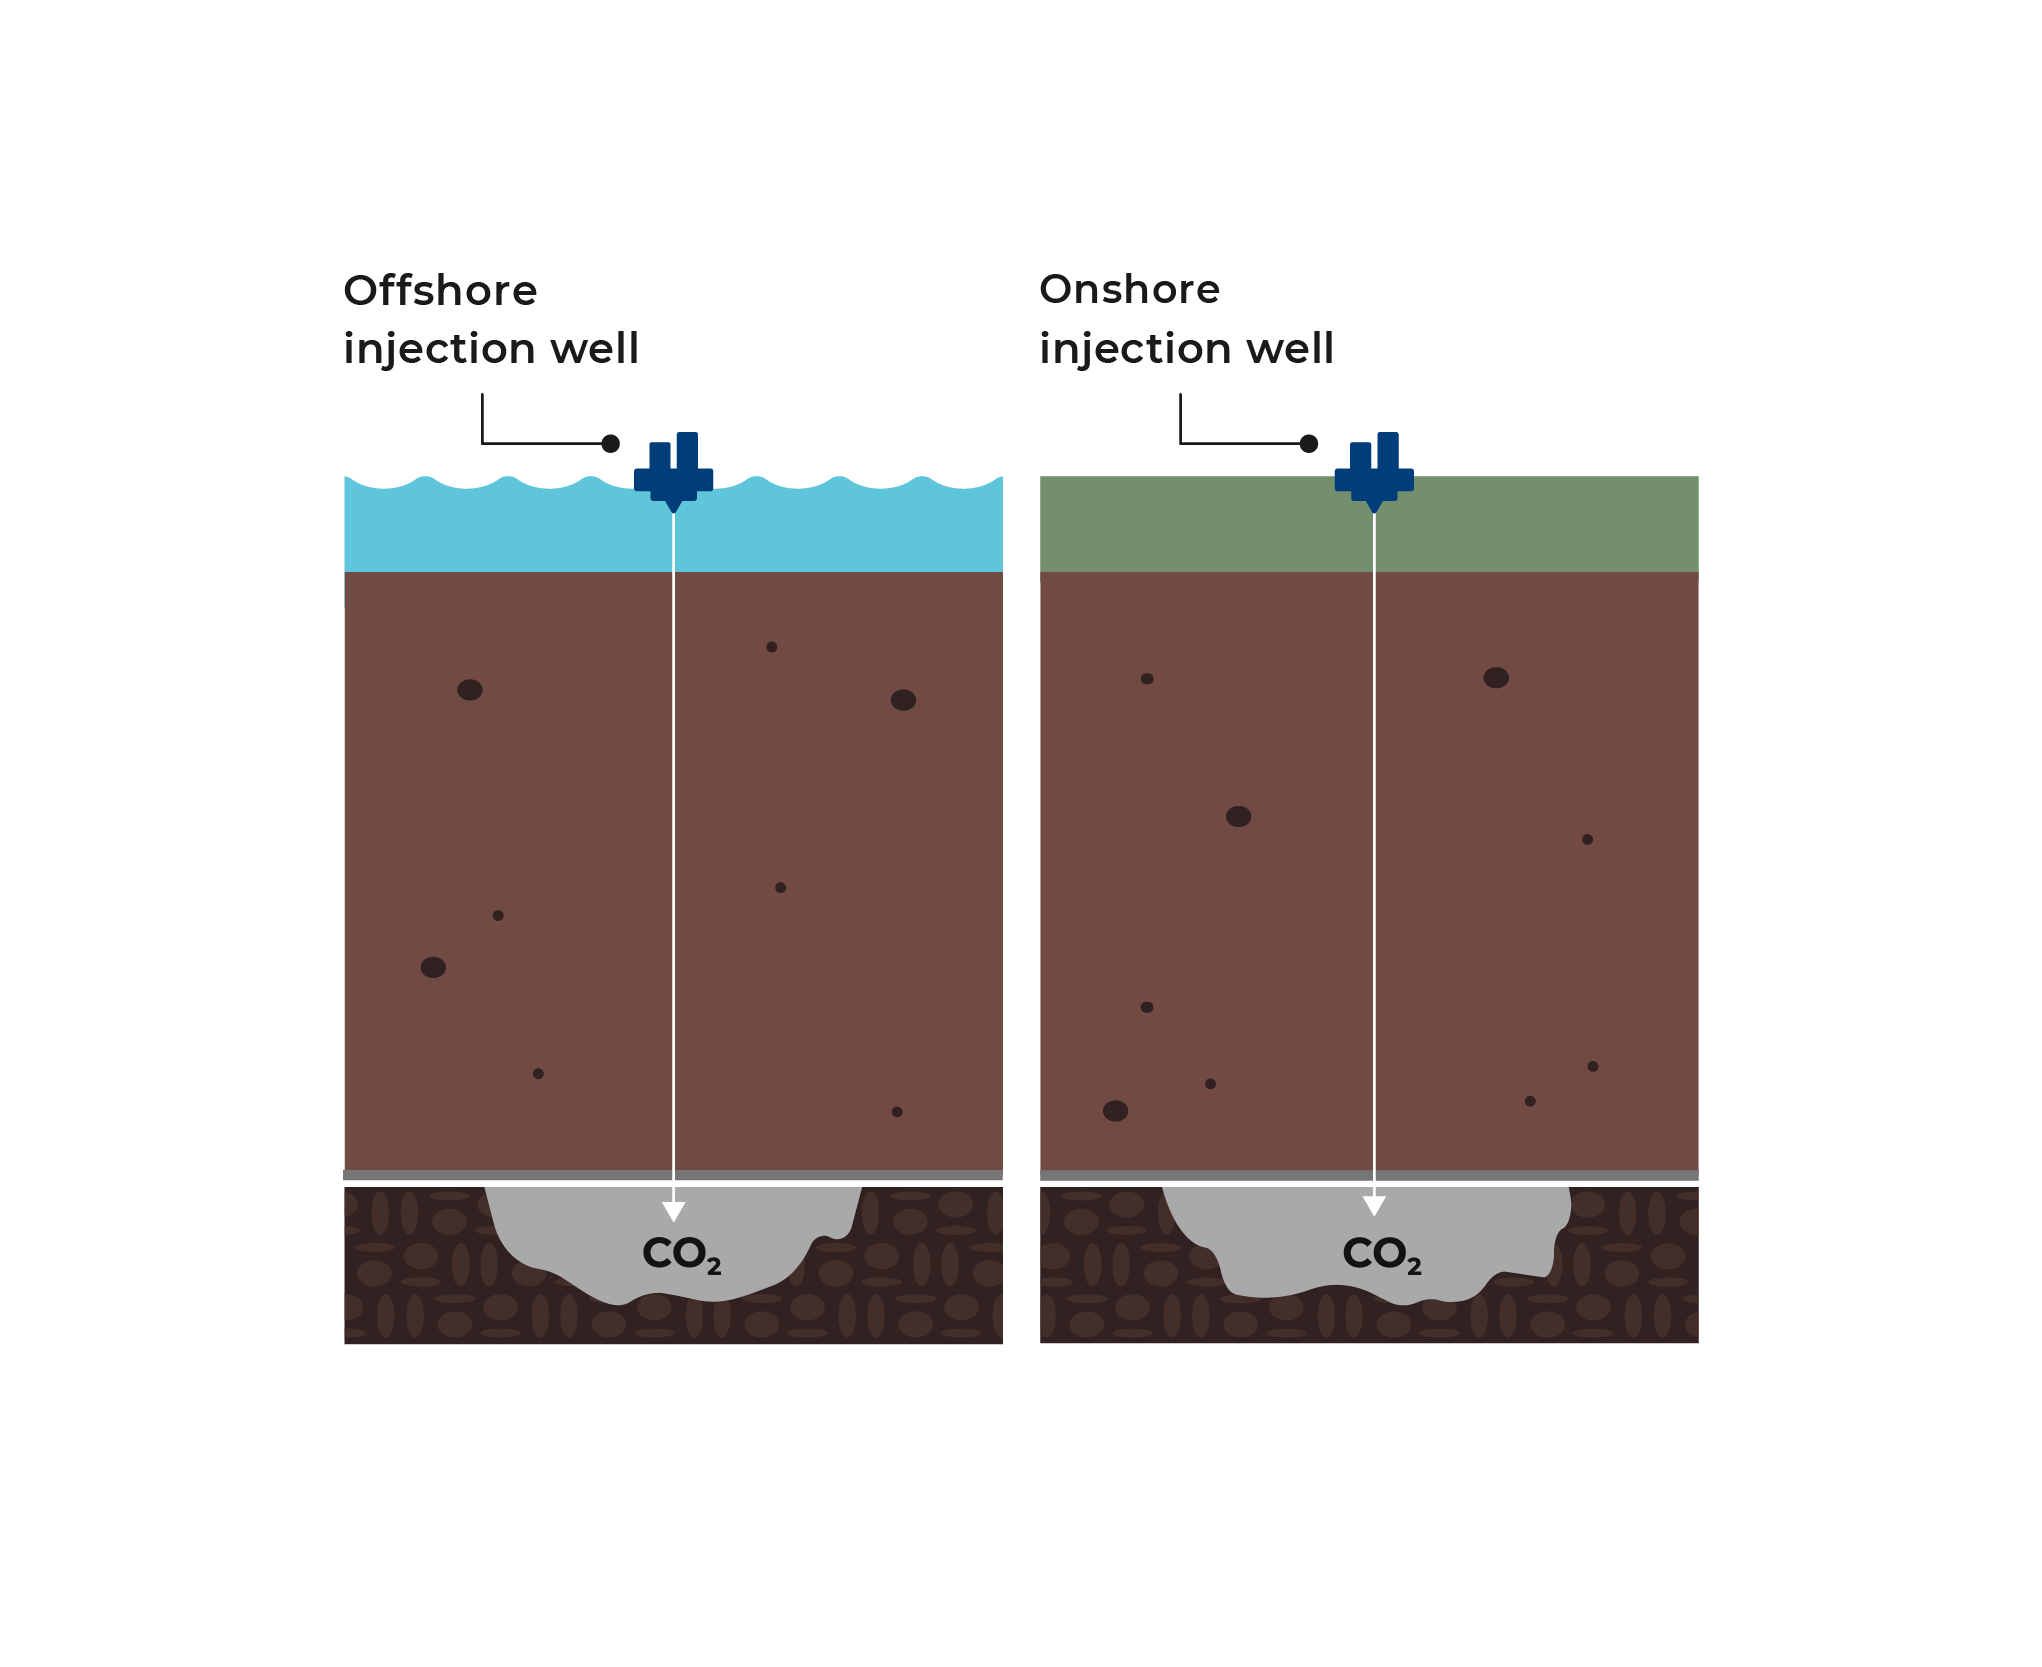 CO₂ injection well diagram comparing onshore and offshore